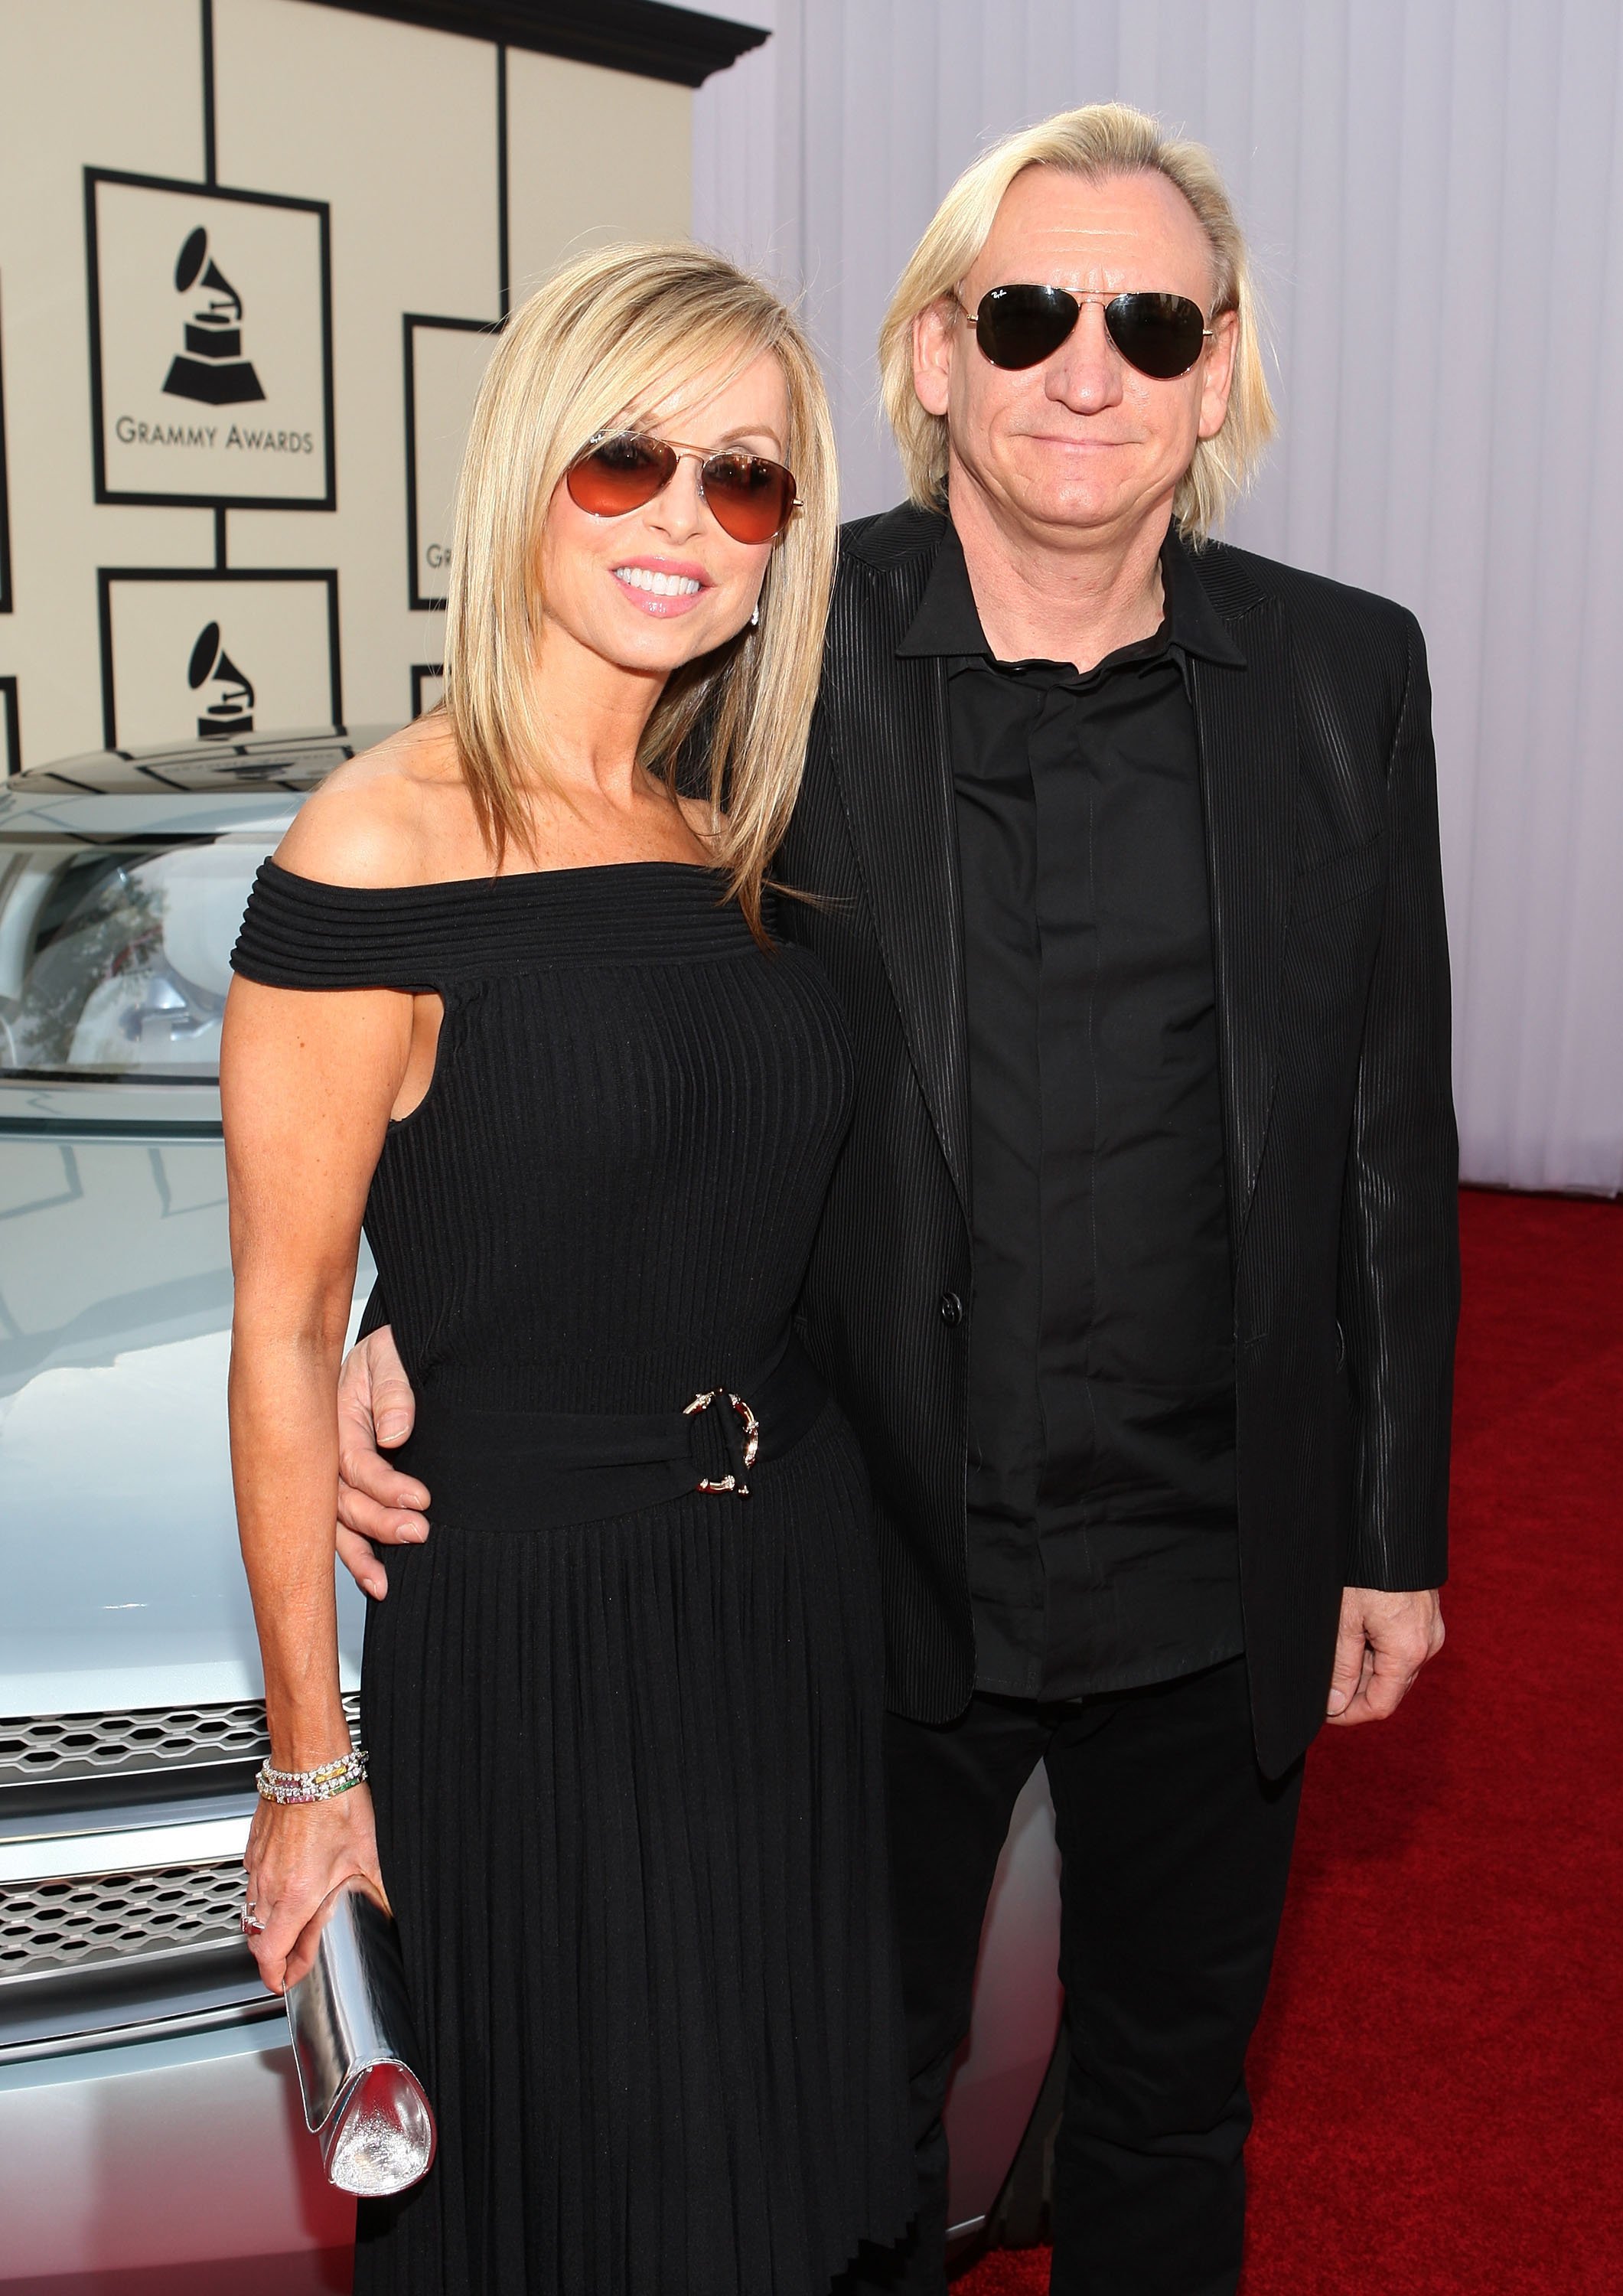  Joe Walsh and Marjorie Bach at the 50th Annual GRAMMY Awards in 2008, in Los Angeles, California. | Source: Getty Images